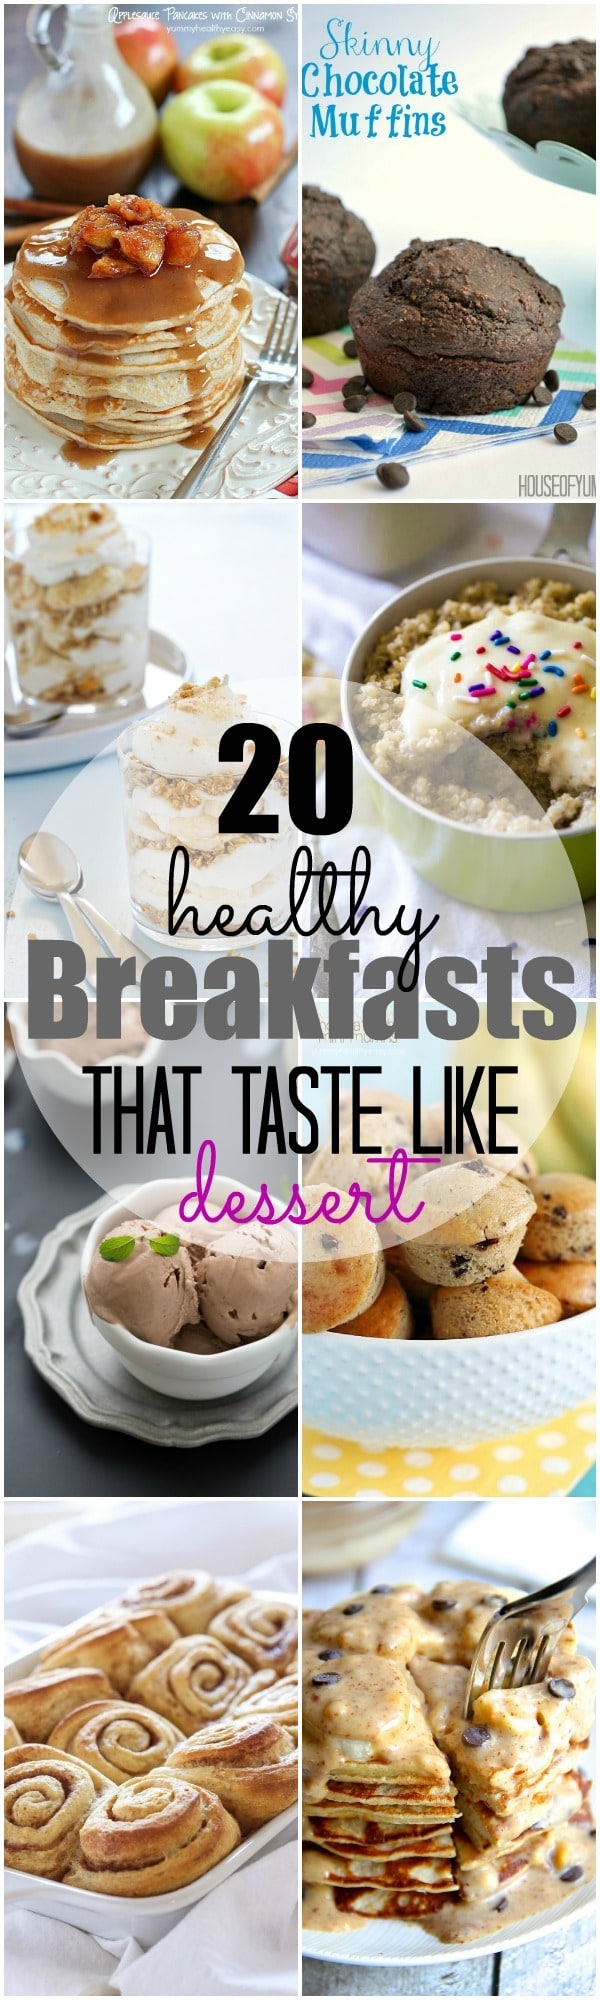 20 Healthy Breakfasts that taste like dessert! The best healthy breakfast recipes that will satisfy your sweet tooth at the same time!